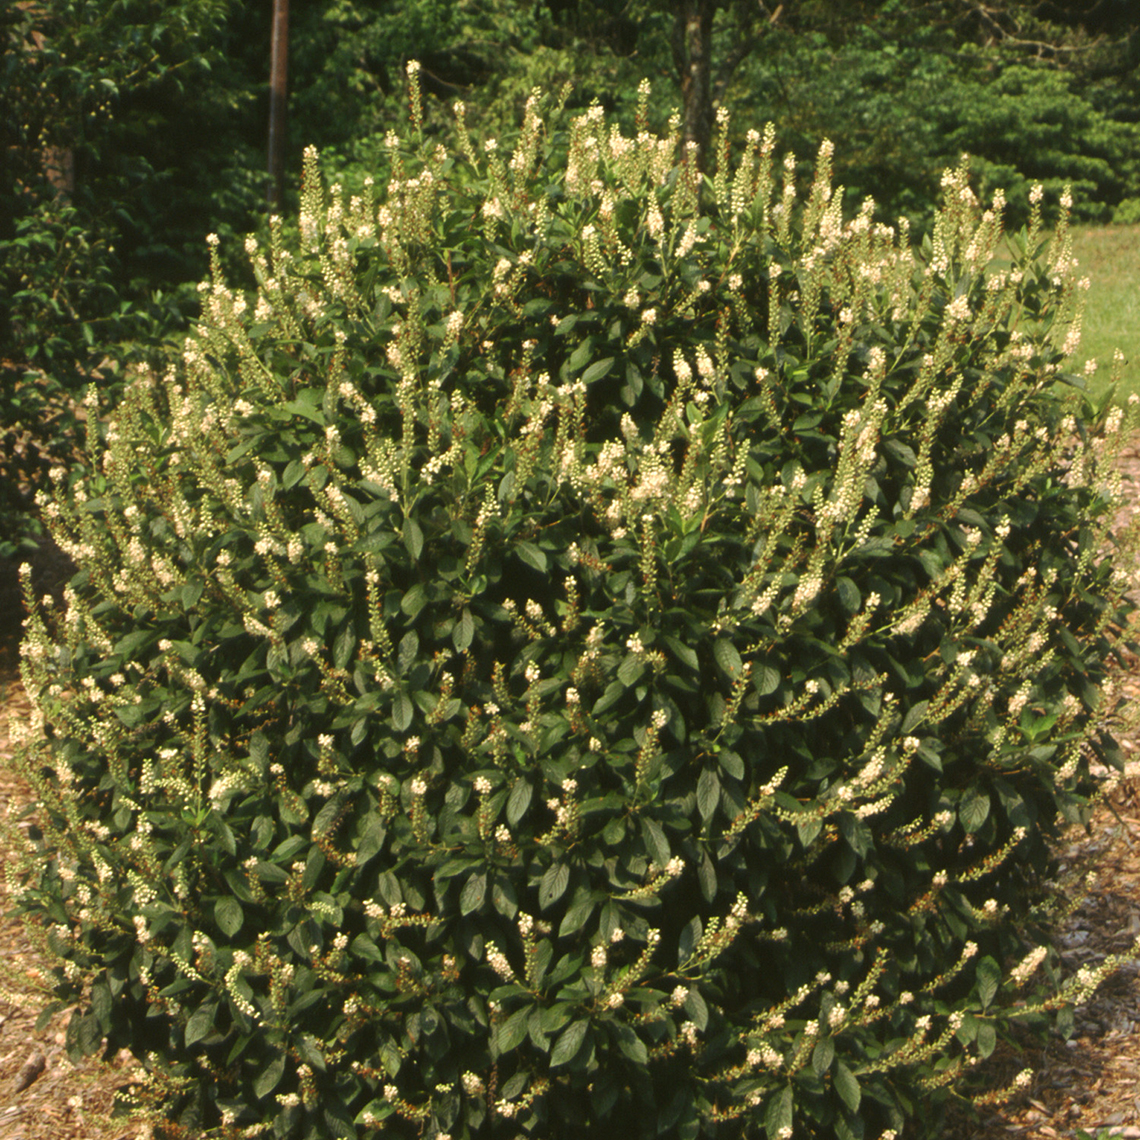 Clethra alnifolia with green foliage and white flowers in landscape